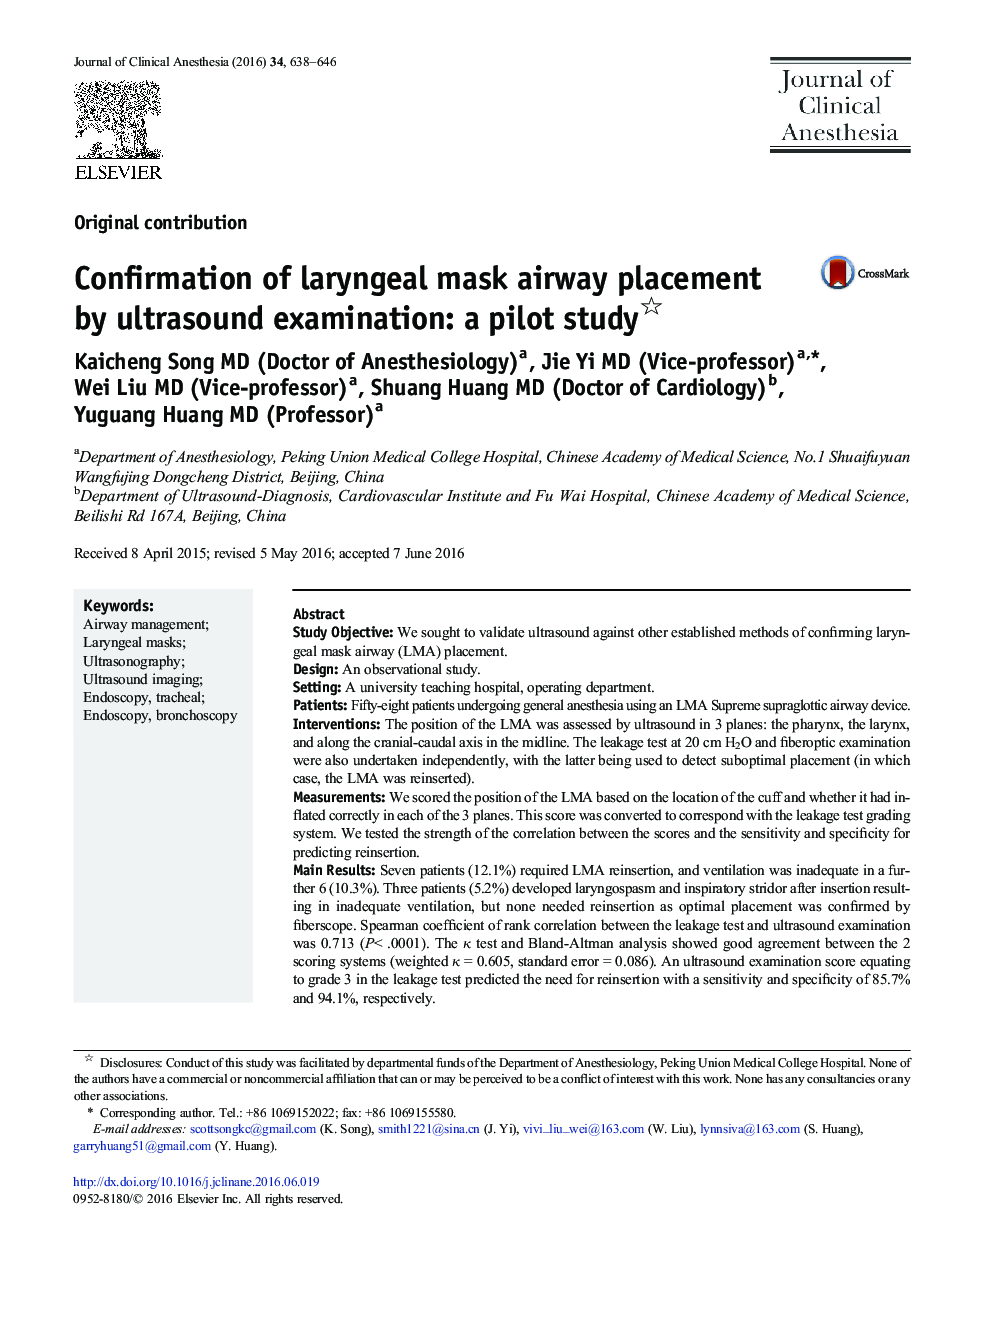 Confirmation of laryngeal mask airway placement by ultrasound examination: a pilot study